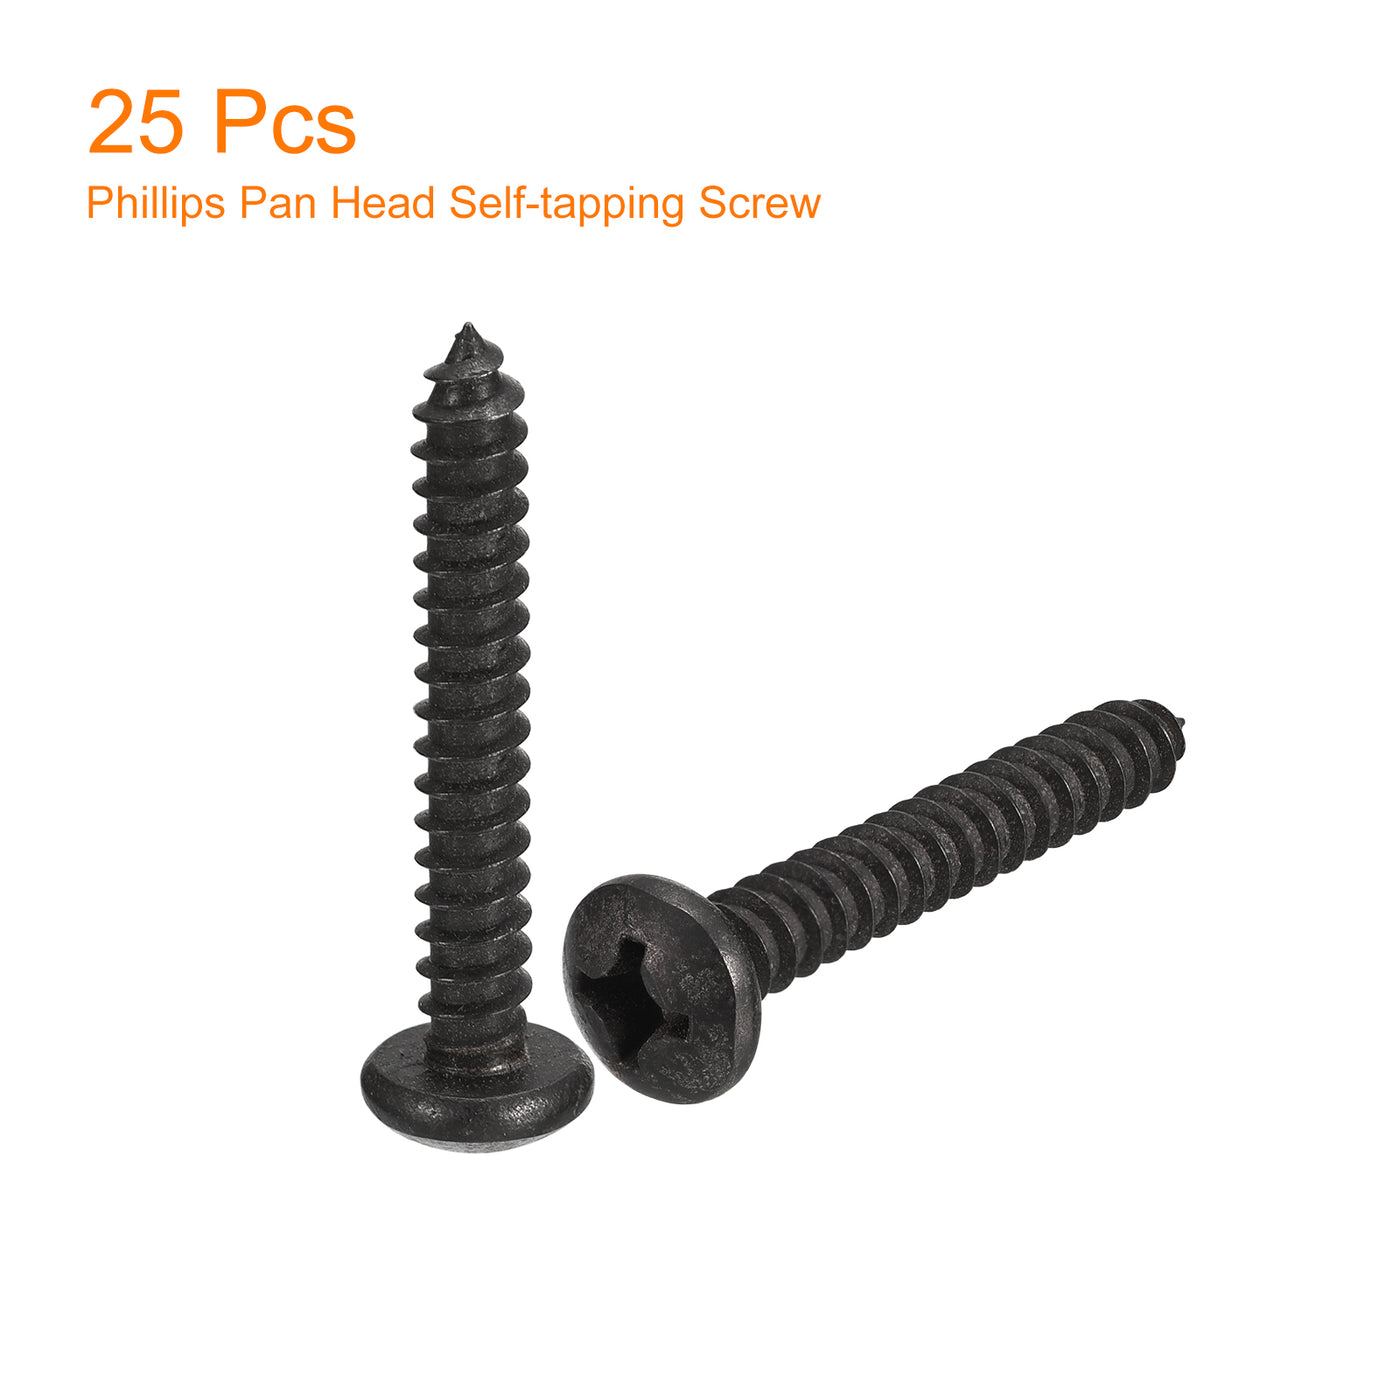 uxcell Uxcell 1/4 x 1-3/8" Phillips Pan Head Self-tapping Screw, 25pcs - 304 Stainless Steel Round Head Wood Screw Full Thread (Black)